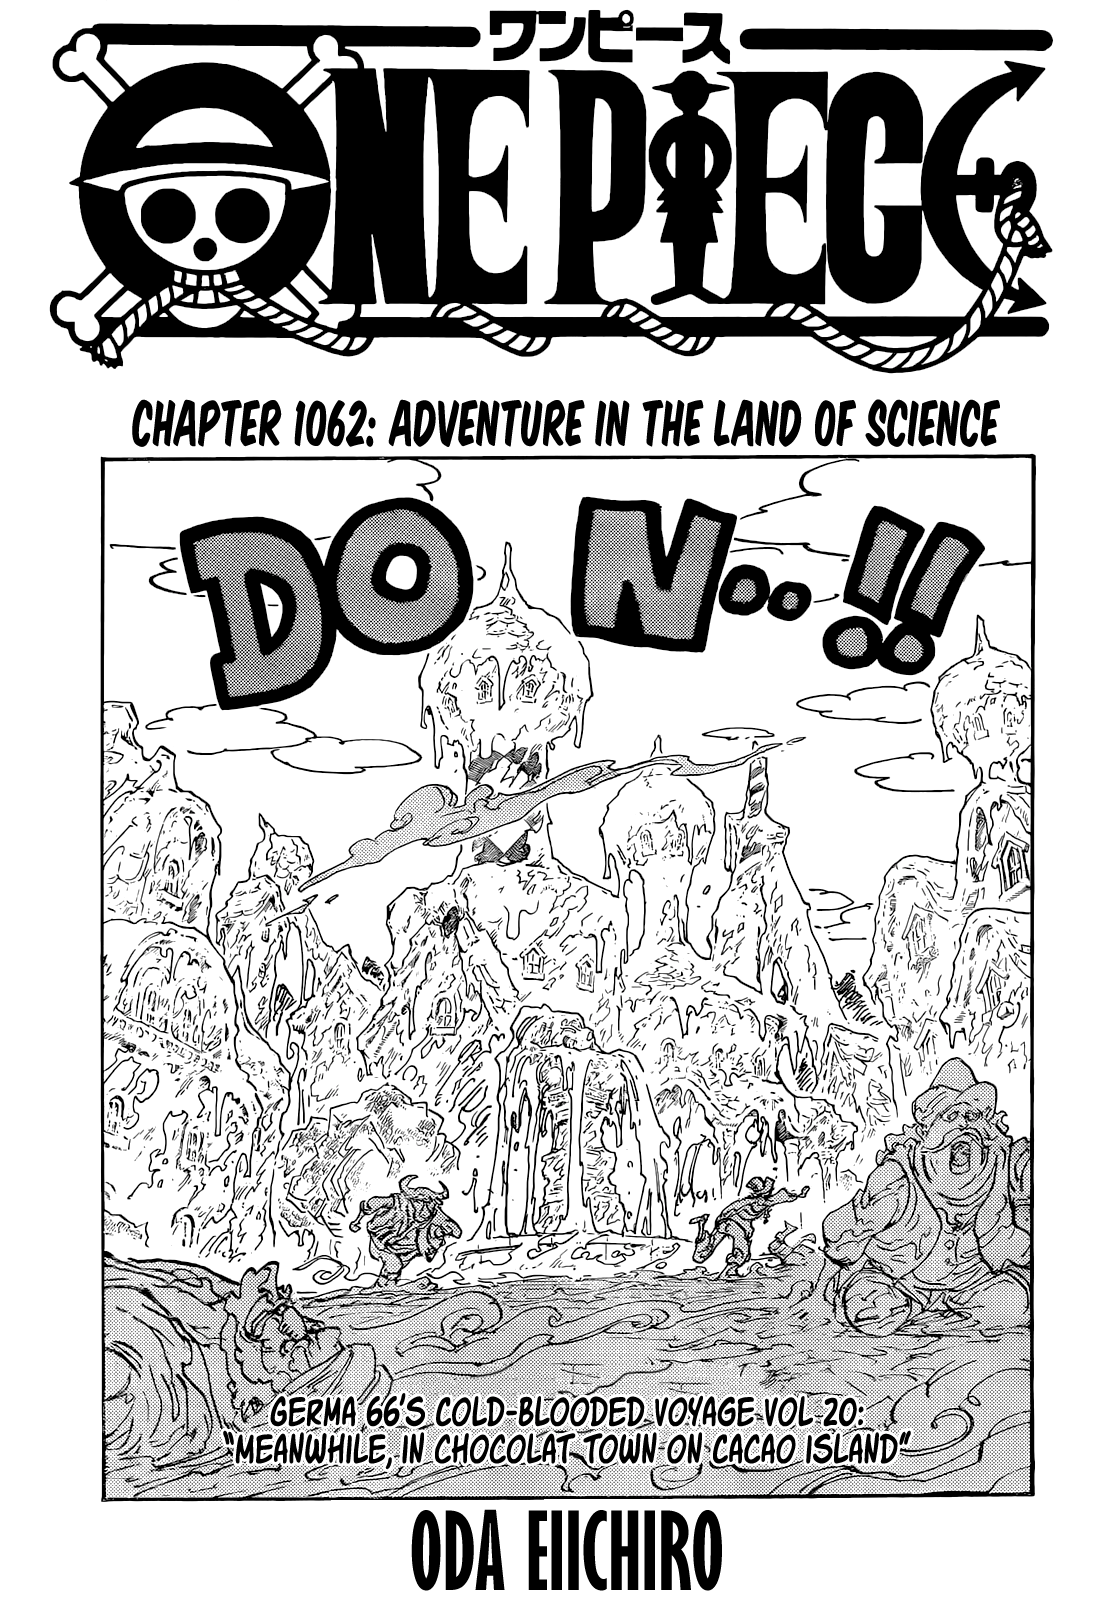 One Piece, Chapter 1062  TcbScans Org - Free Manga Online in High Quality